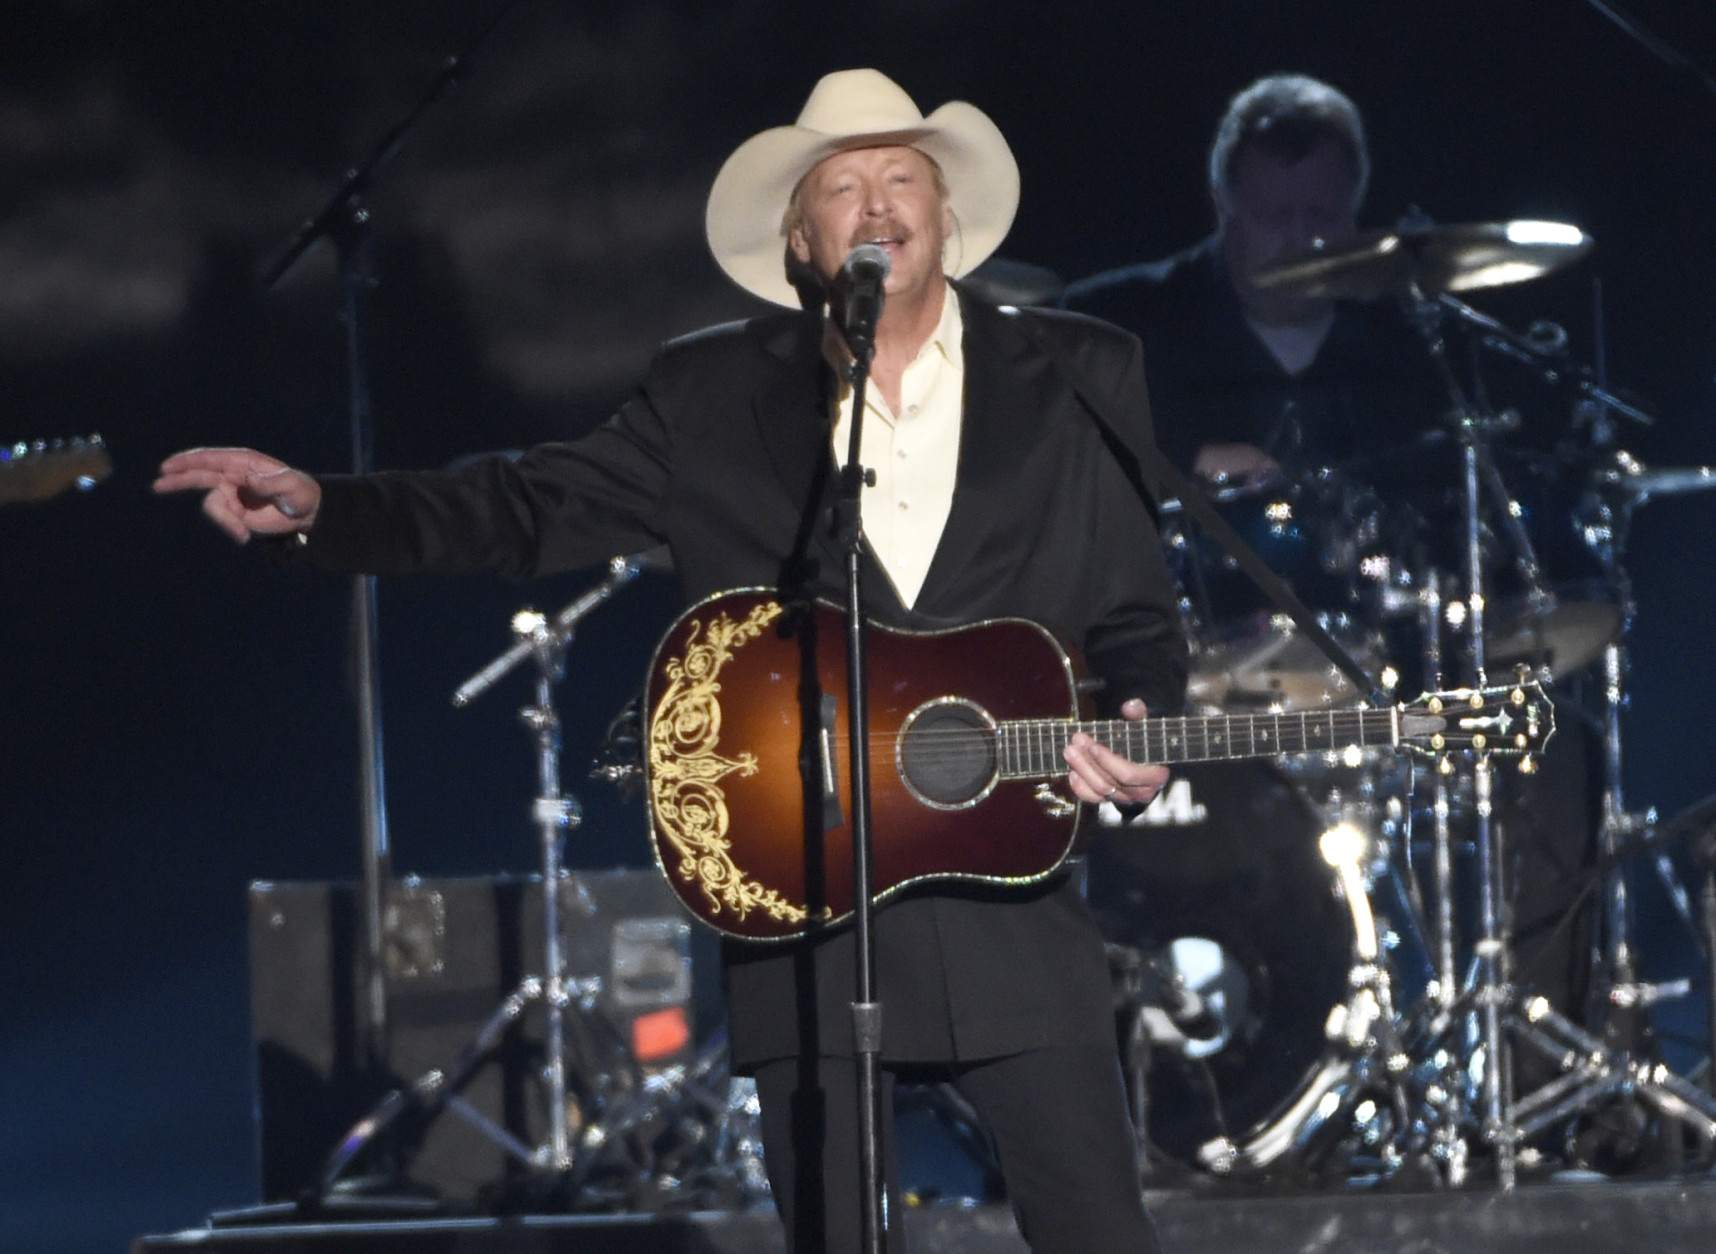 Alan Jackson performs at the 50th annual Academy of Country Music Awards at AT&amp;T Stadium on Sunday, April 19, 2015, in Arlington, Texas. (Photo by Chris Pizzello/Invision/AP)